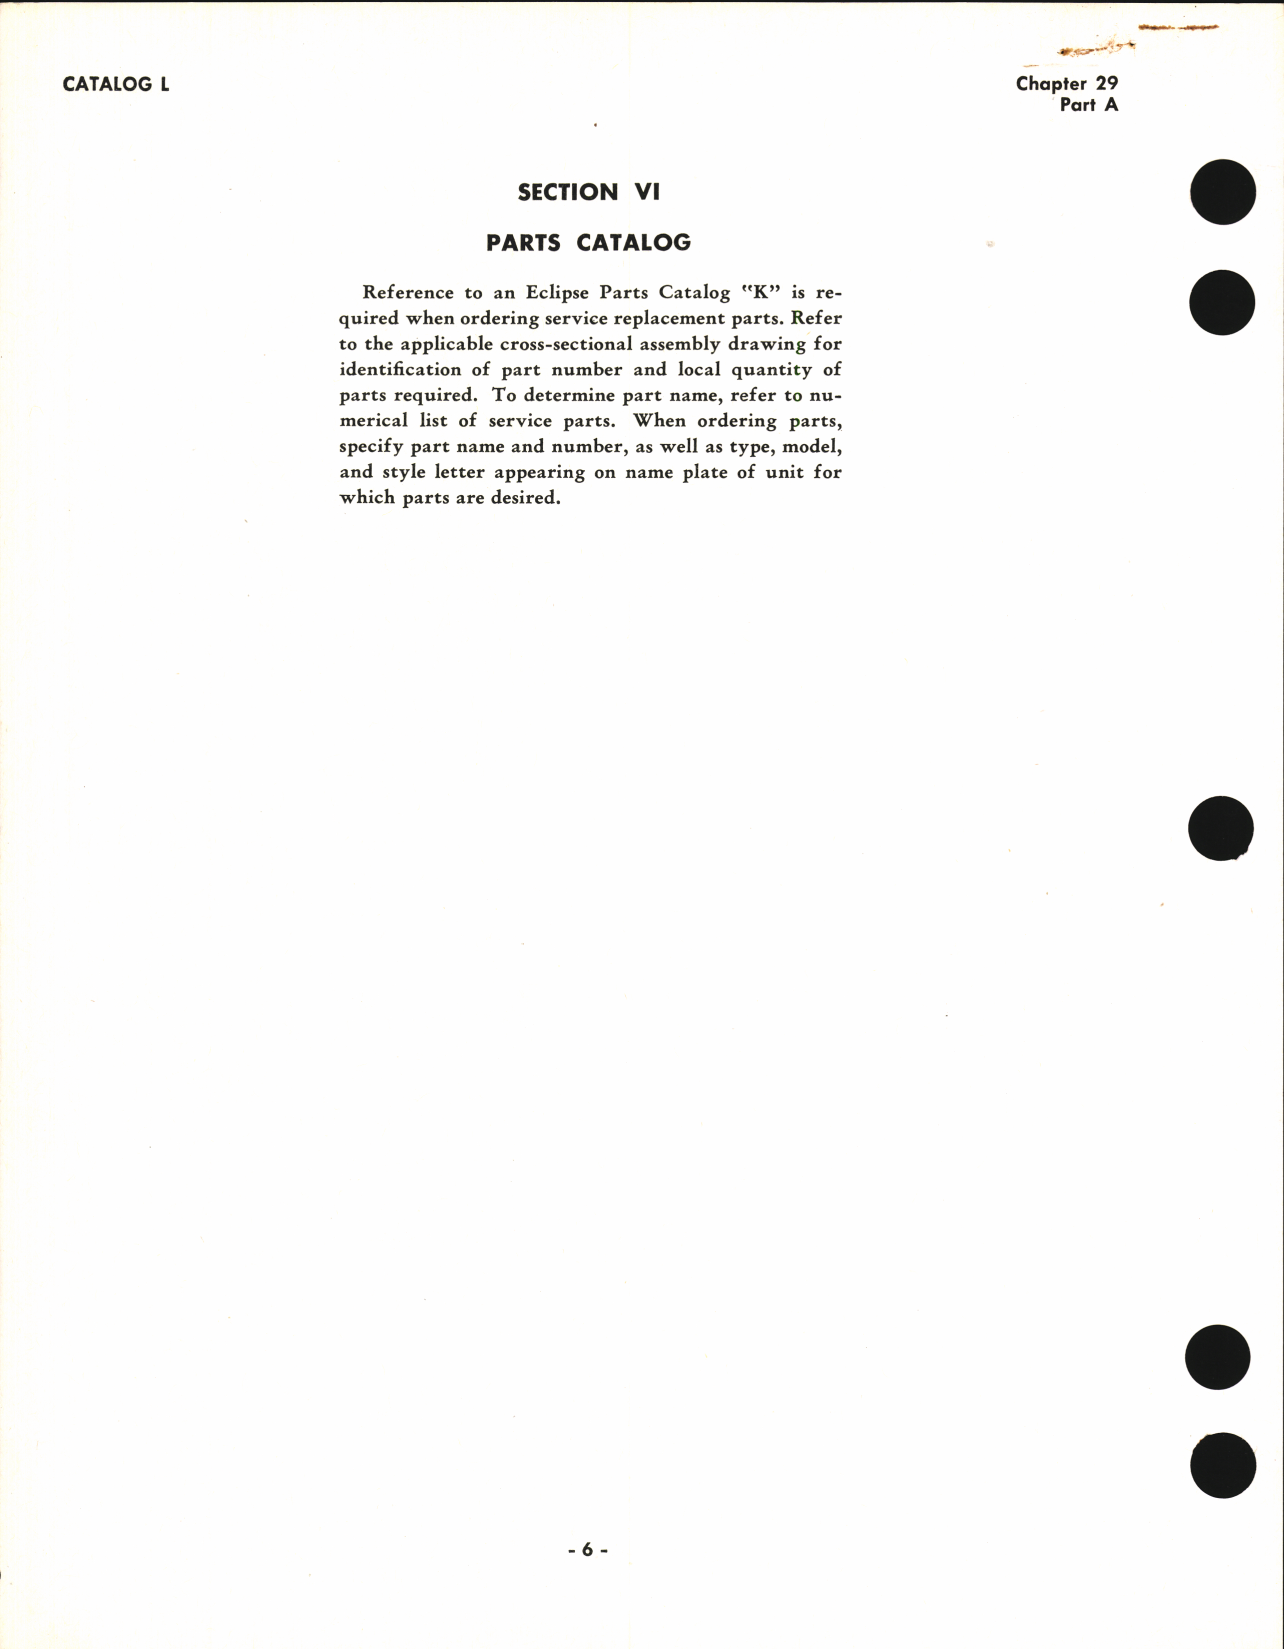 Sample page 6 from AirCorps Library document: Operating and Service Instructions for Eclipse Aviation Engine-Driven Air Pumps Types 549 and 550